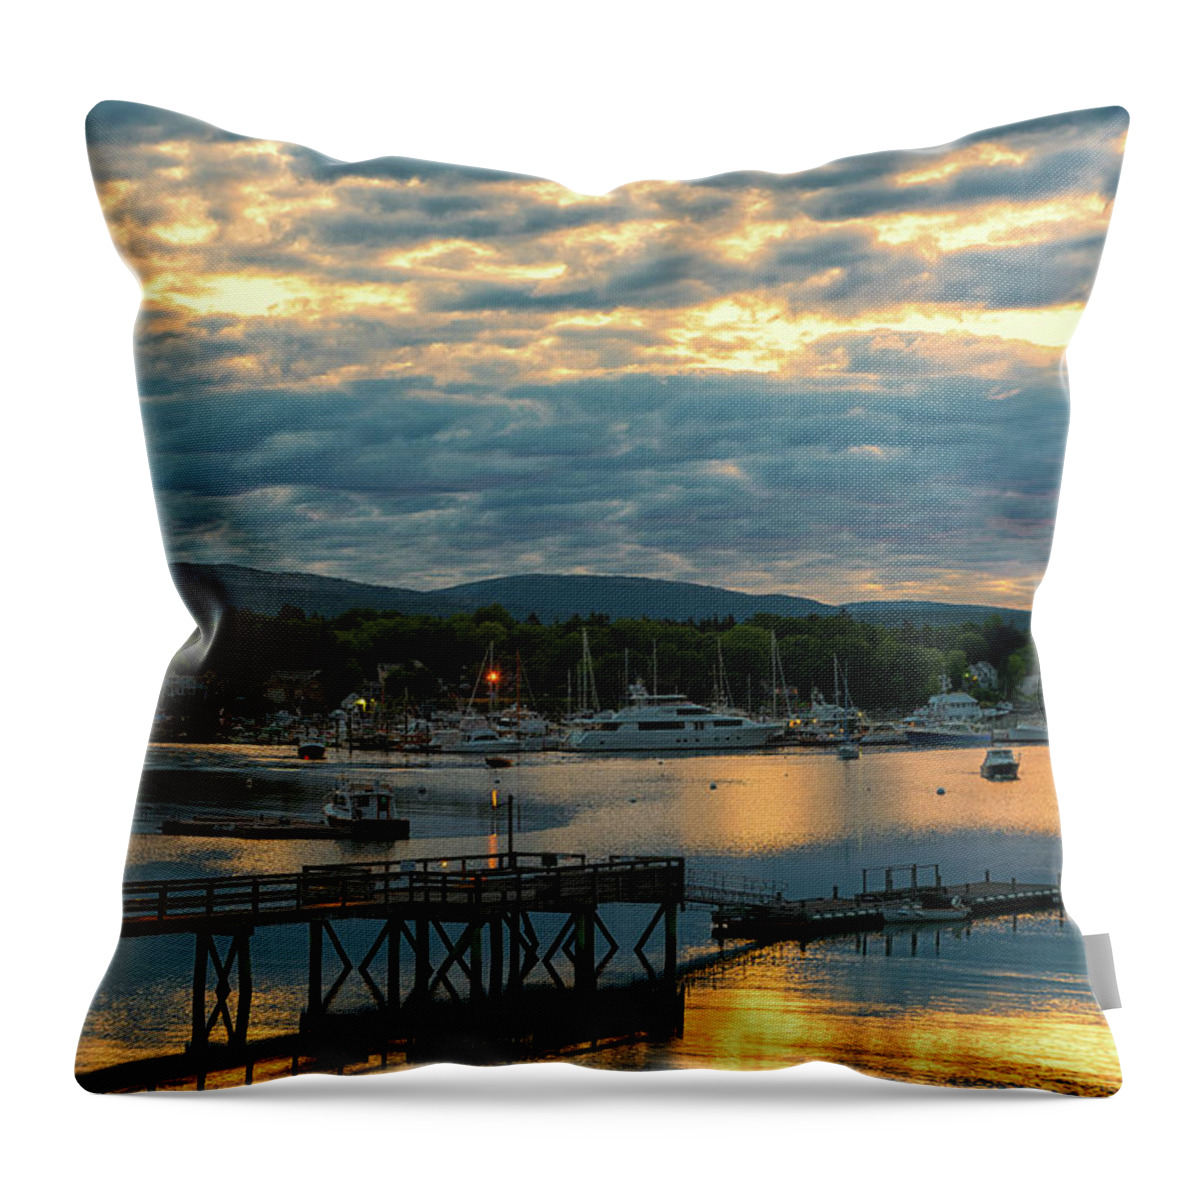 Main Throw Pillow featuring the photograph Sunrise Over Southwest Harbor by Dennis Kowalewski